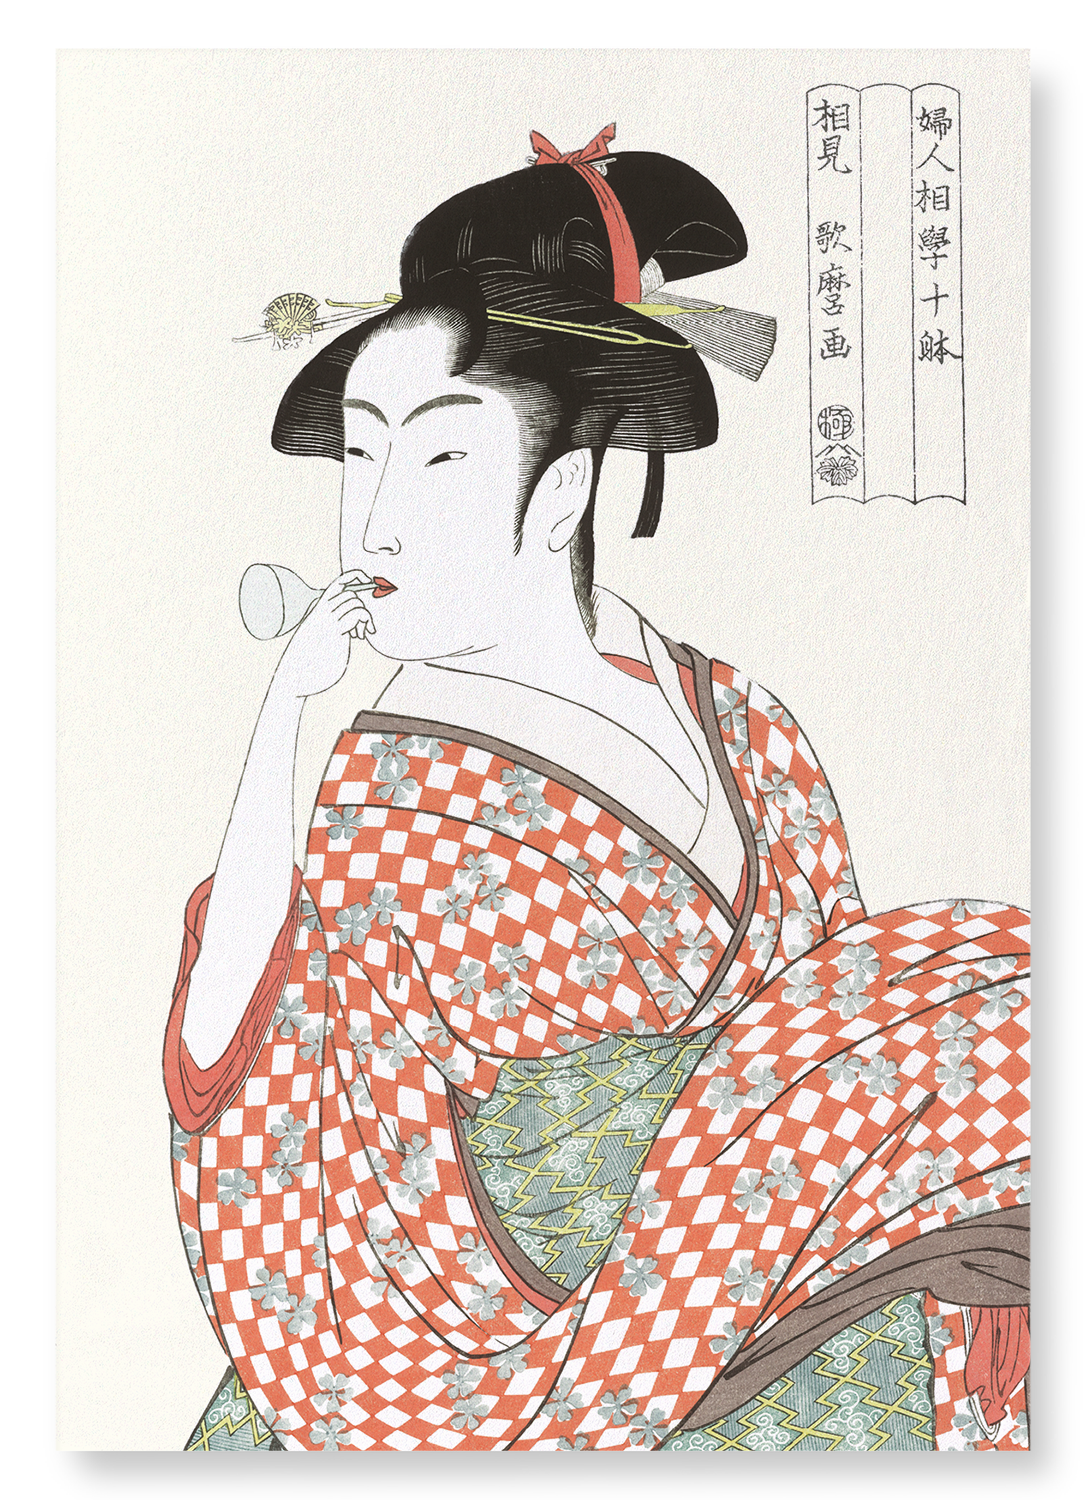 BEAUTY WITH A GLASS TOY: Japanese Art Print